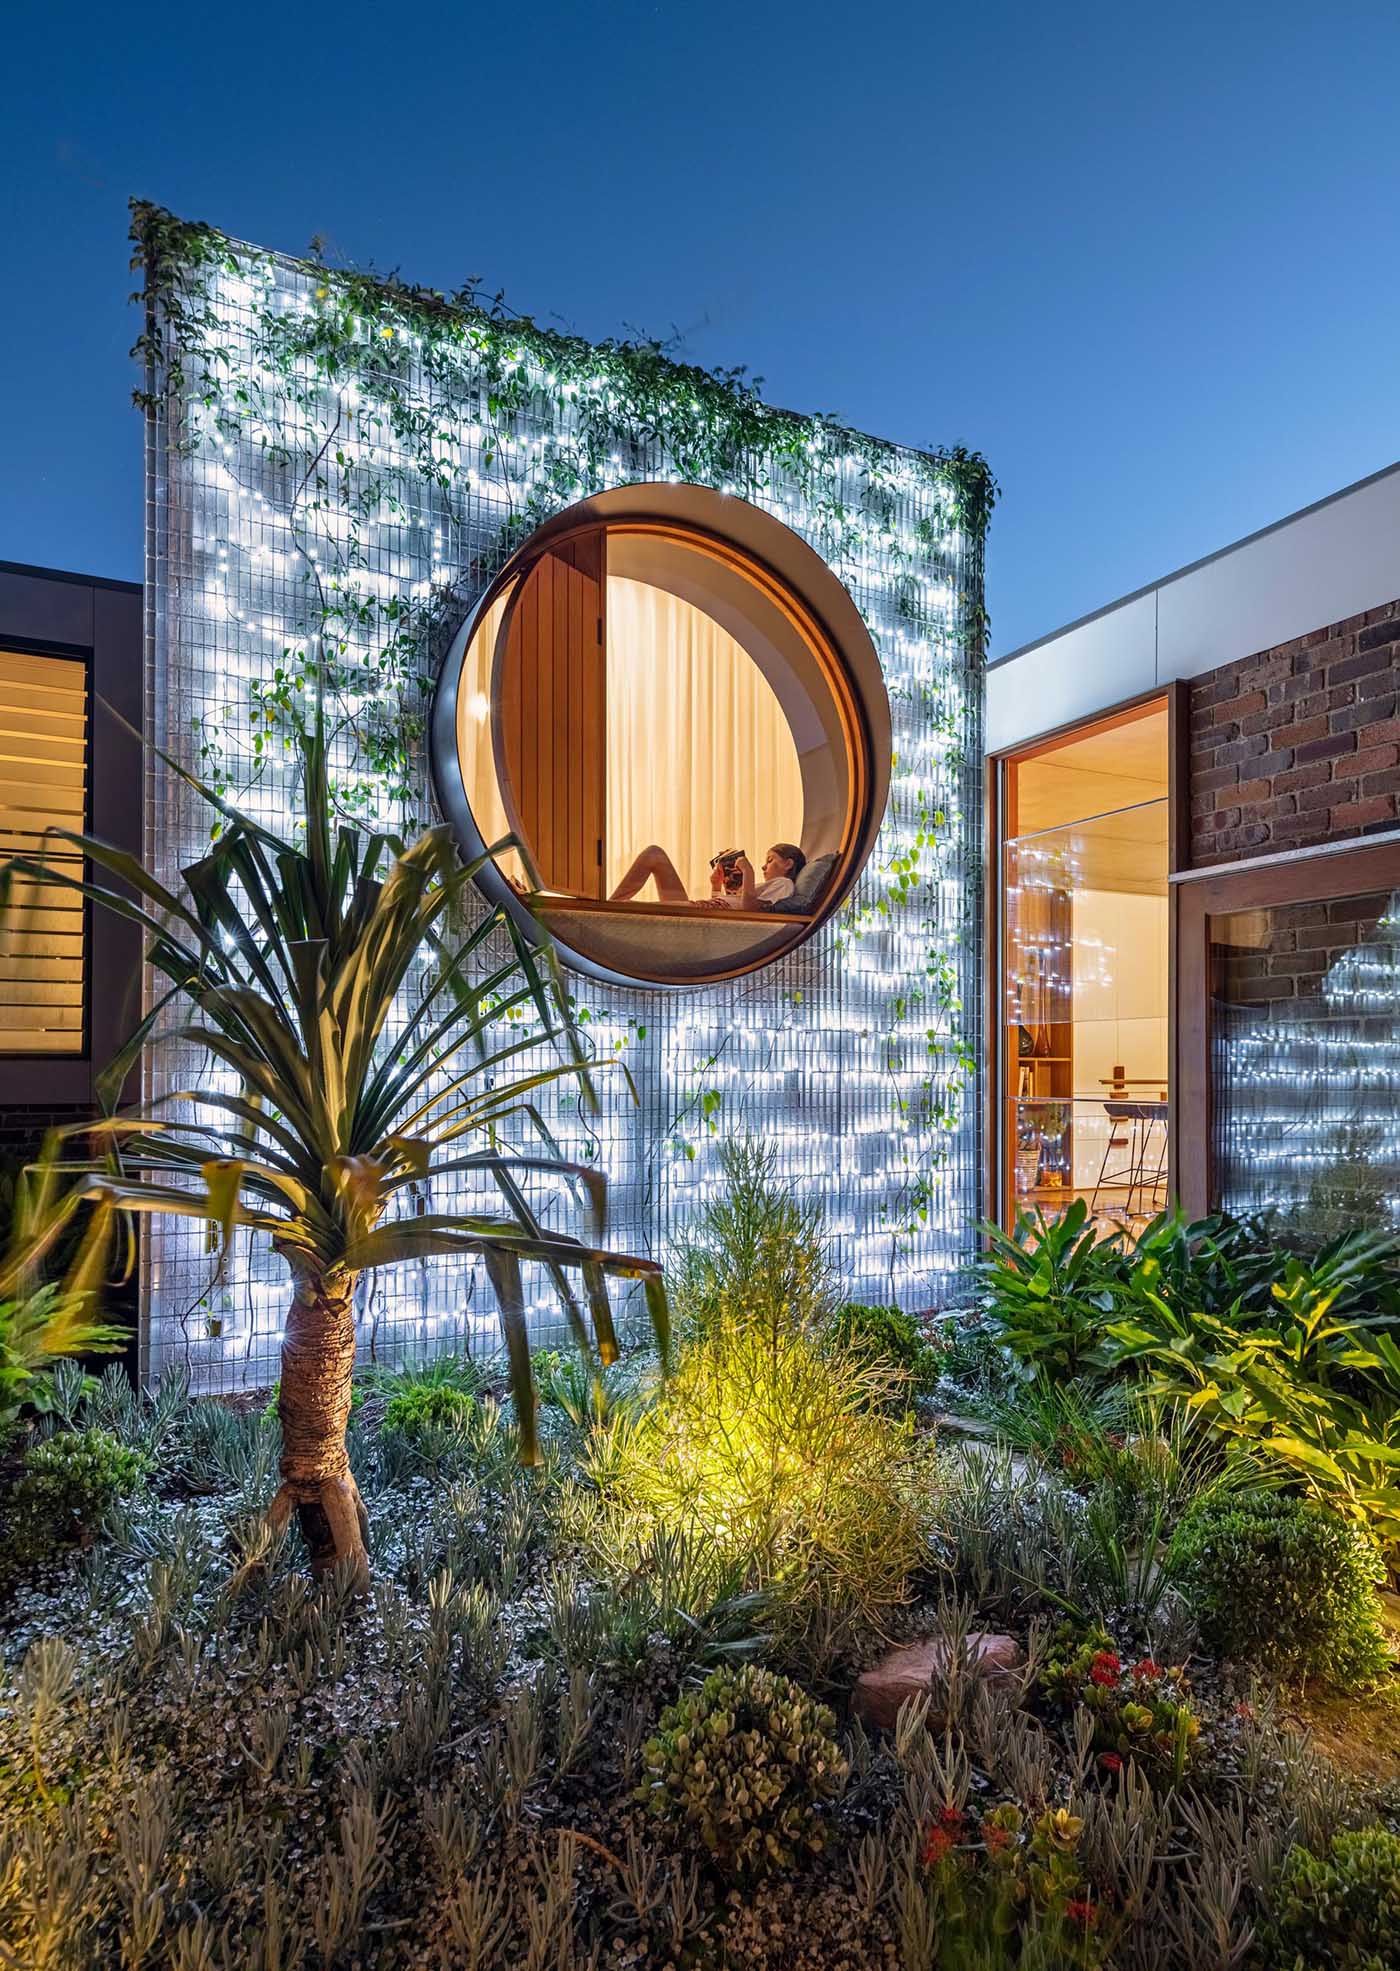 At night, this wall is lit from behind, creating an outdoor focal point that also helps to light up the nearby patio.